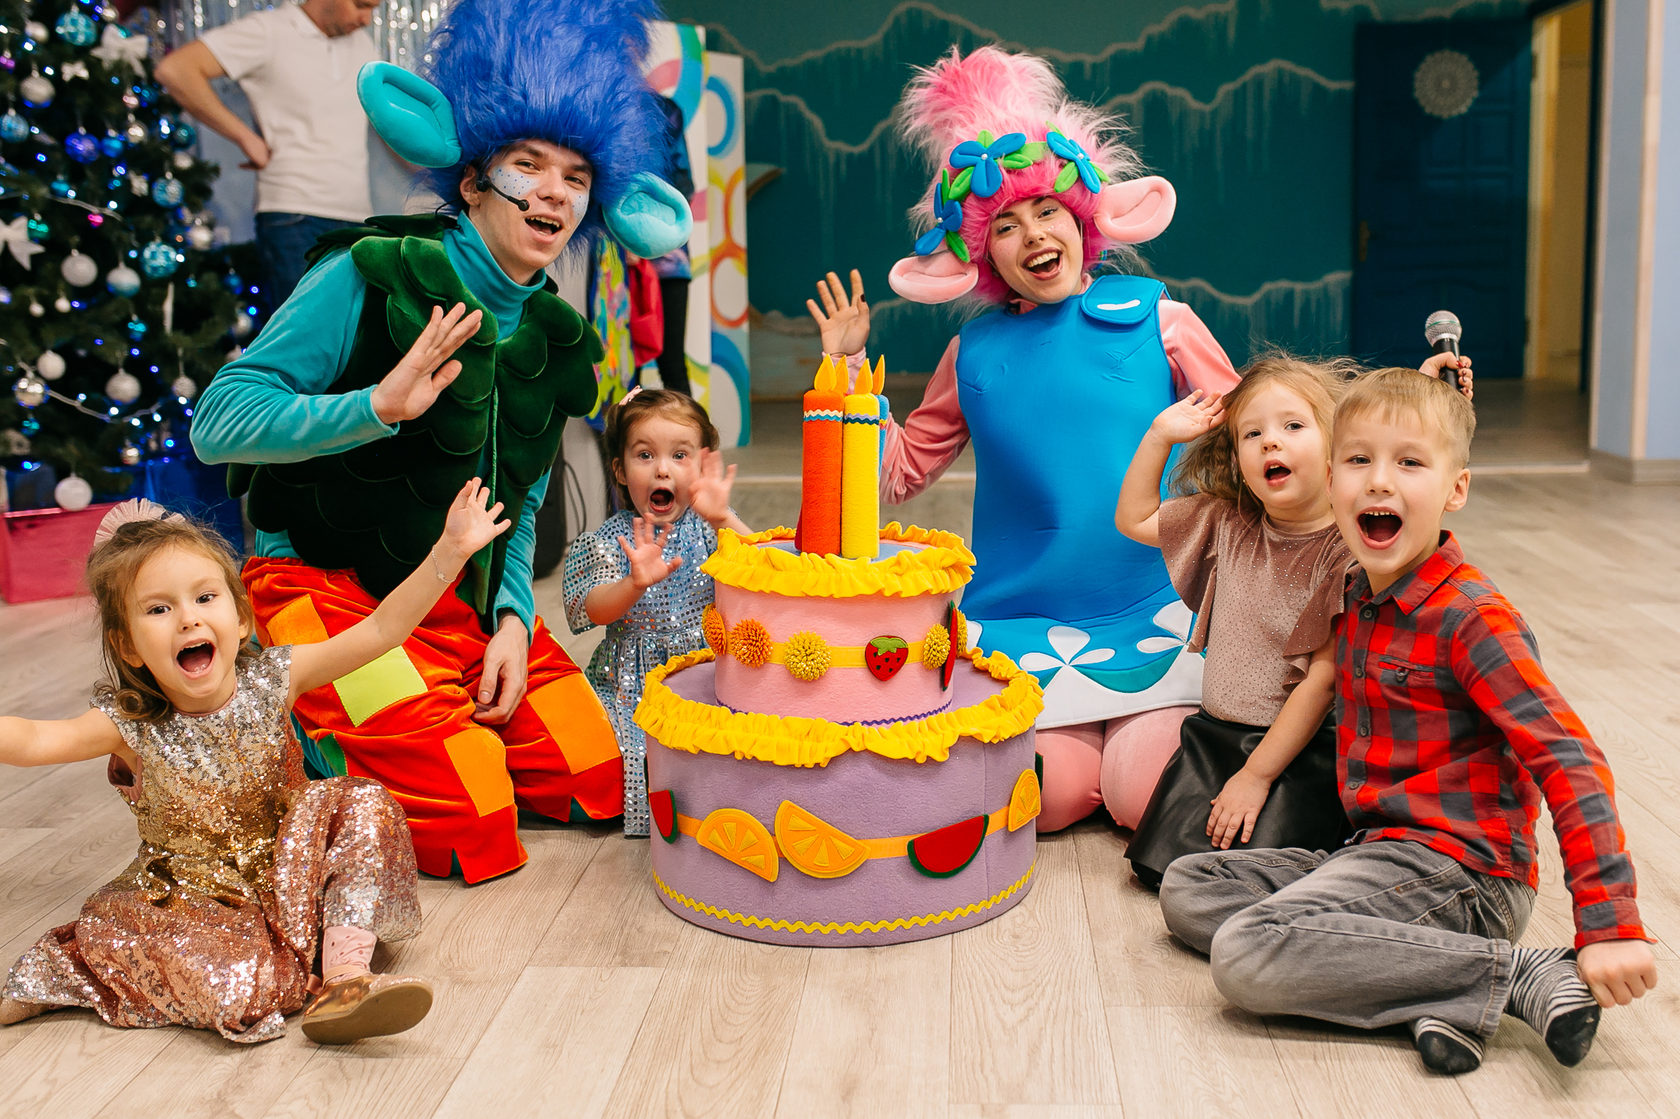 Create Unforgettable Memories with Childrens Parties at Our Café